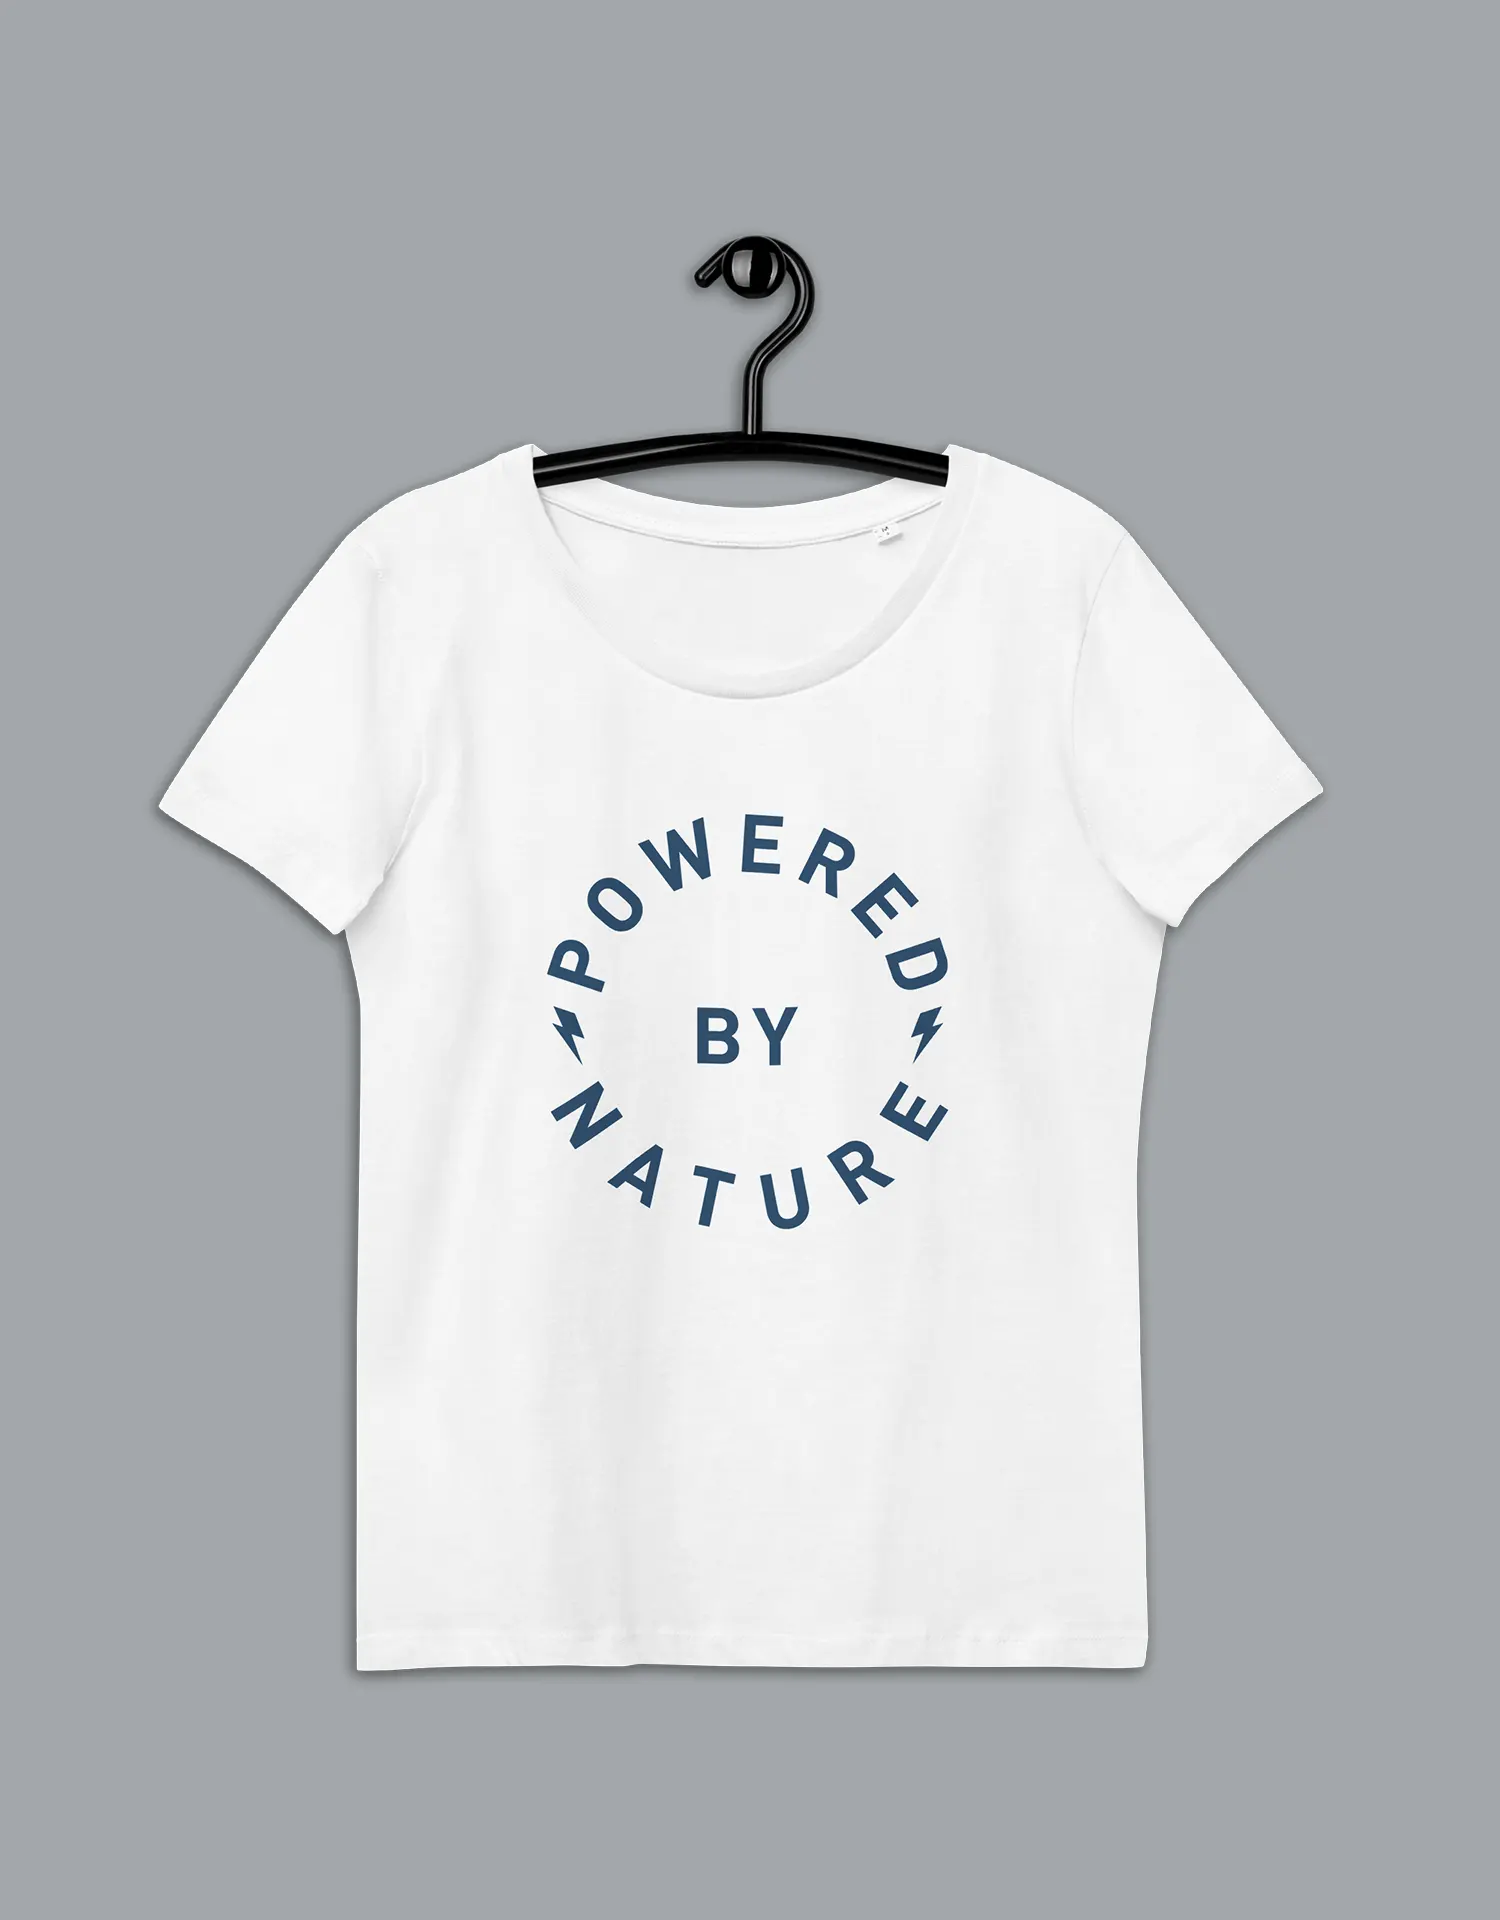 Powered by Nature Eco-friendly fitted t-shirt by KOAV